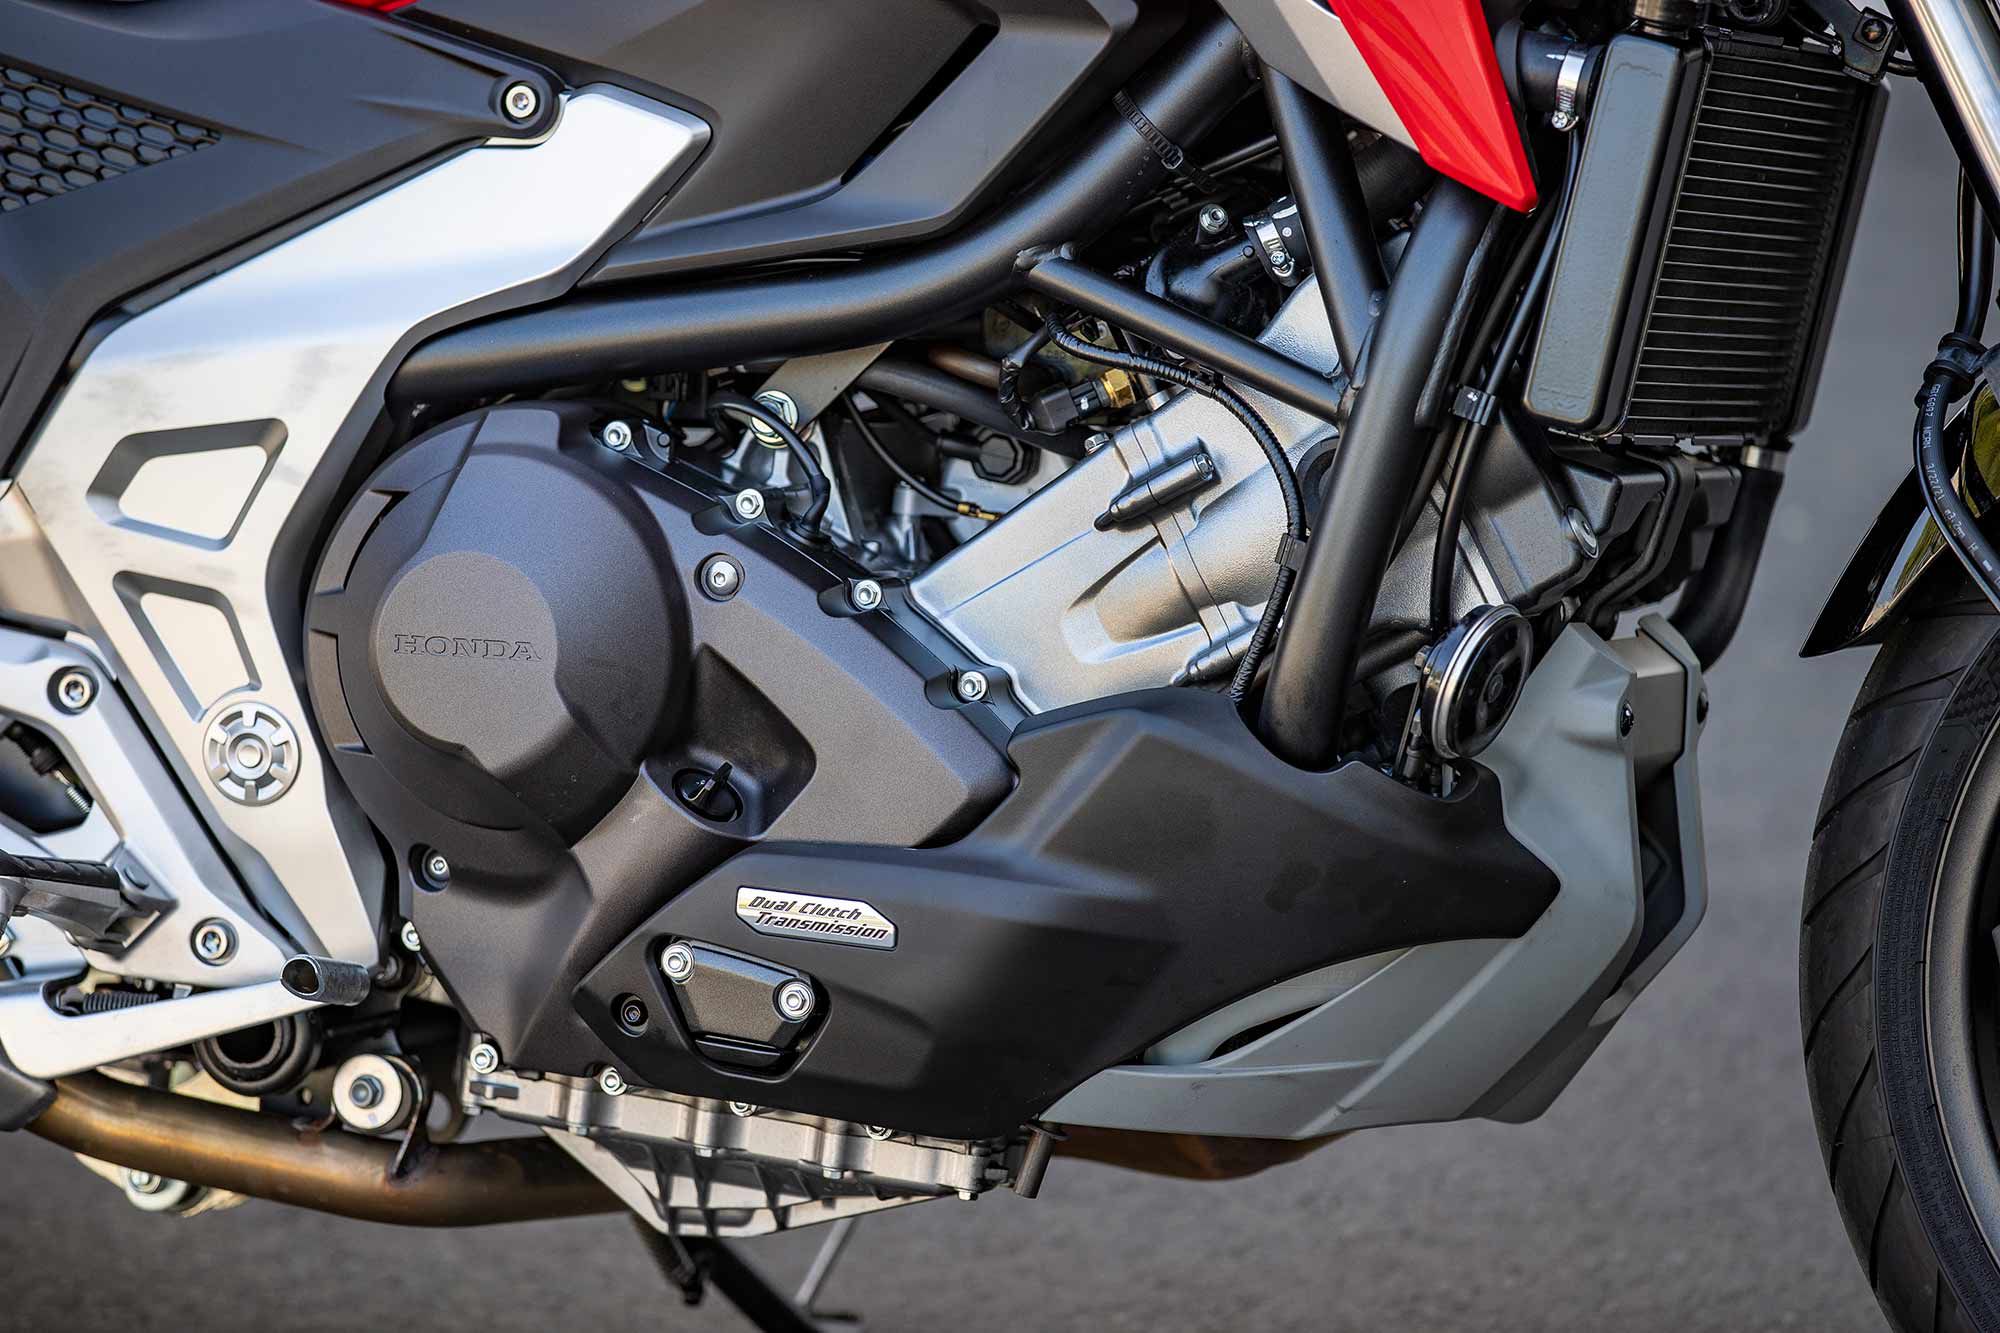 The Honda NC750X is powered by a torque-rich 745cc SOHC parallel-twin engine. The cylinders are set at a 55-degree angle, which allows for large-capacity storage.